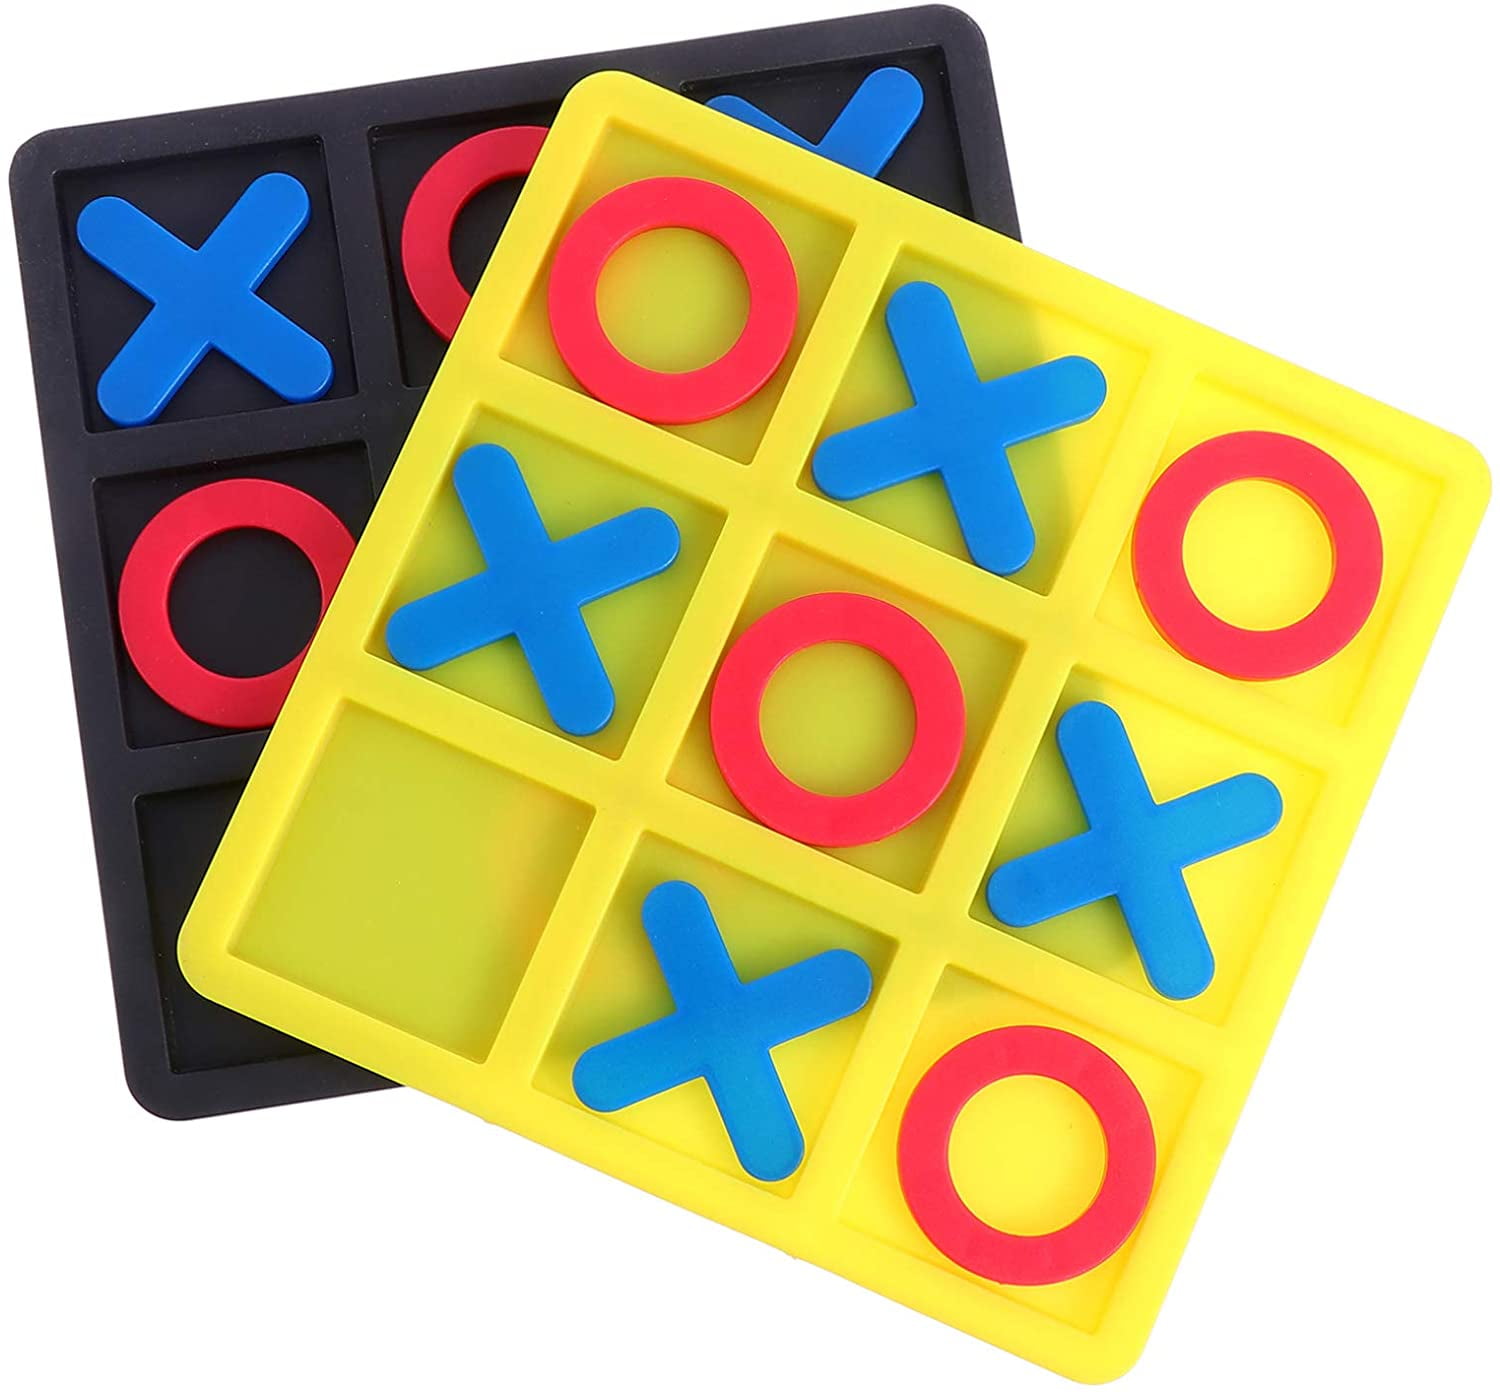 Tic Tac Toe Game for Kids and Adults, Big Eat Small Game Toy, Living Room  and Desk Decor Family Game, Classic Board Game - AliExpress